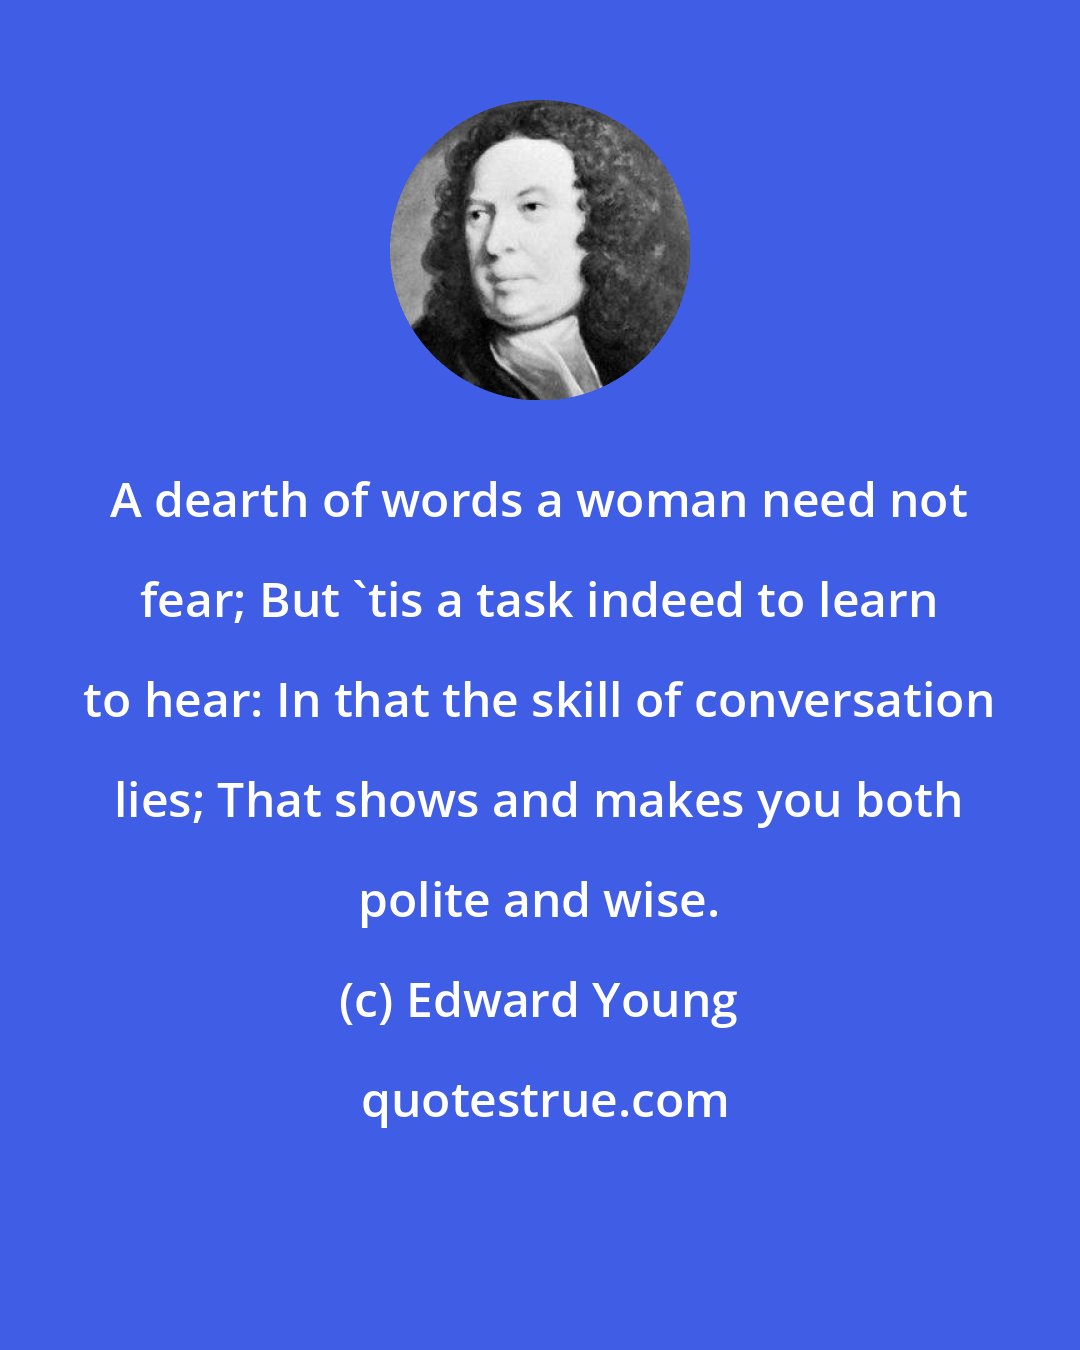 Edward Young: A dearth of words a woman need not fear; But 'tis a task indeed to learn to hear: In that the skill of conversation lies; That shows and makes you both polite and wise.